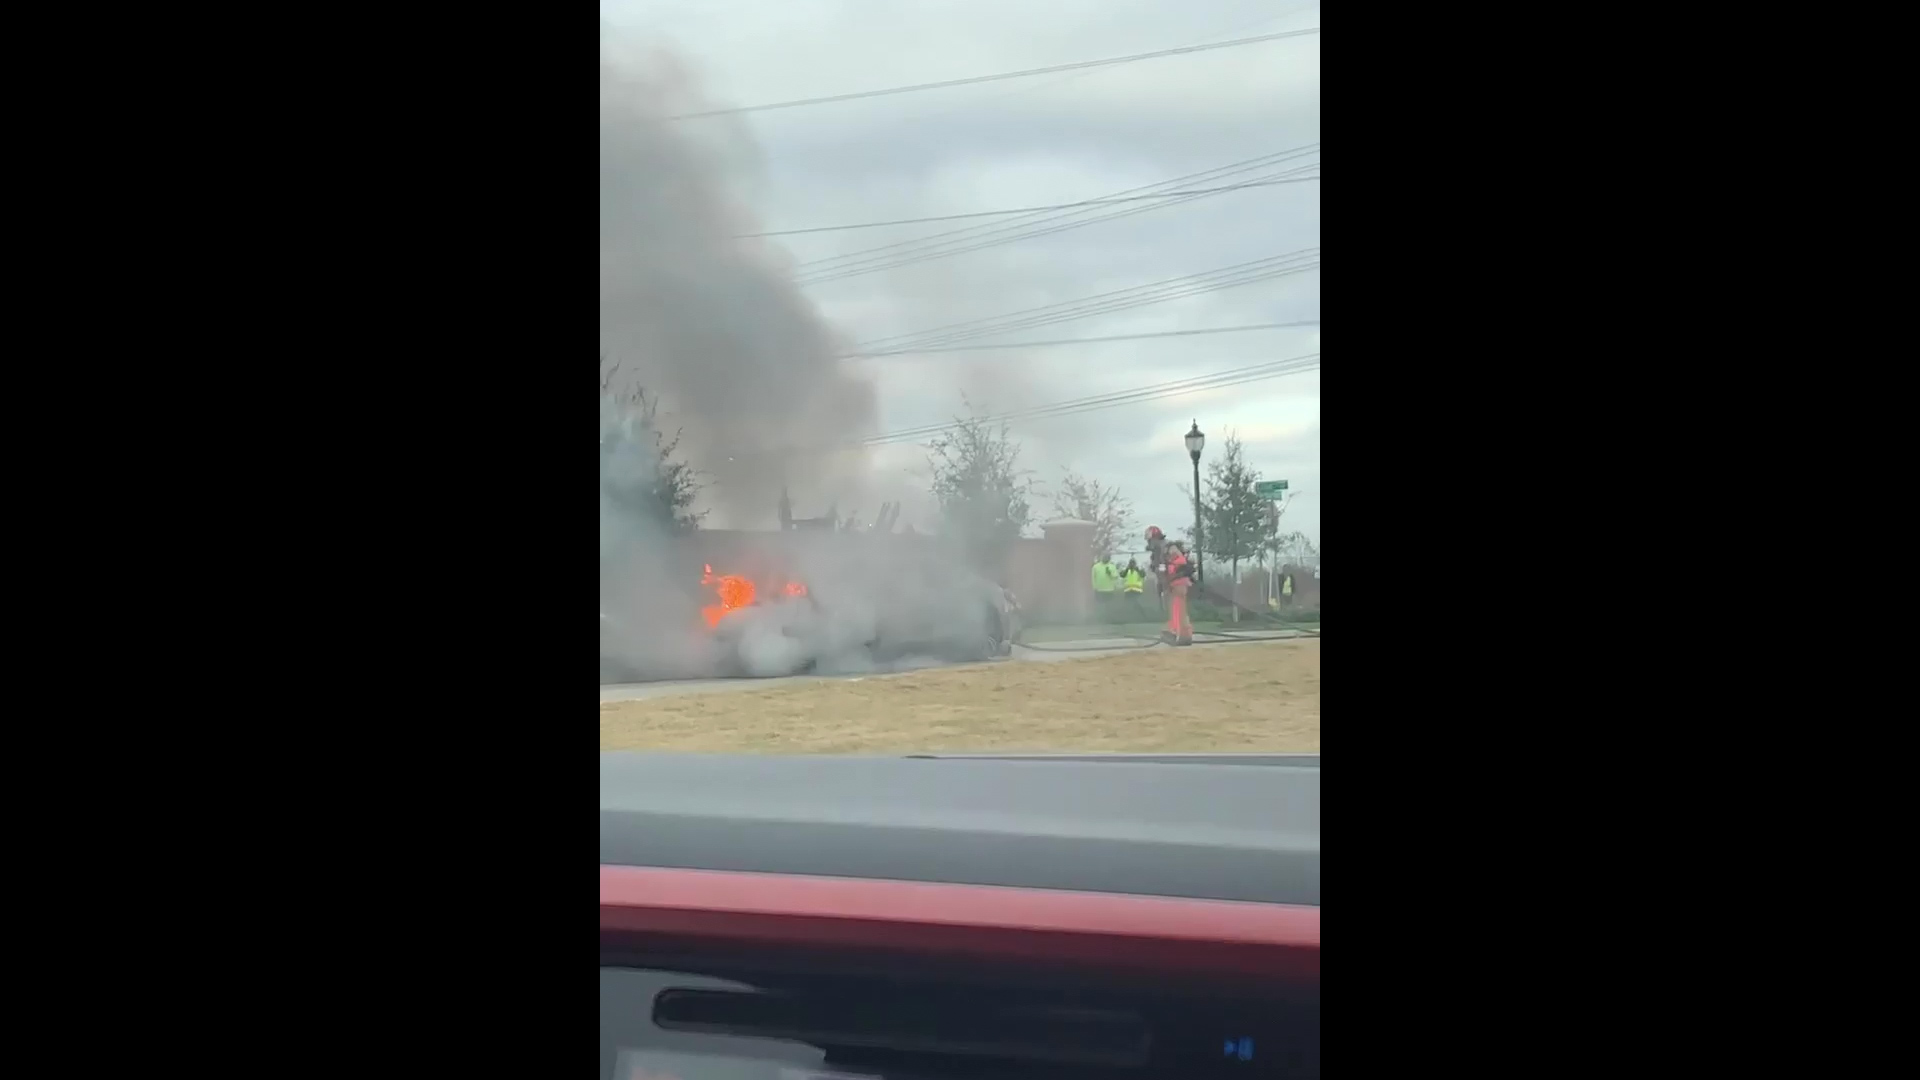 Tesla Model S Erupts In Flames Prompting Nhtsa To Step In The Washington Post